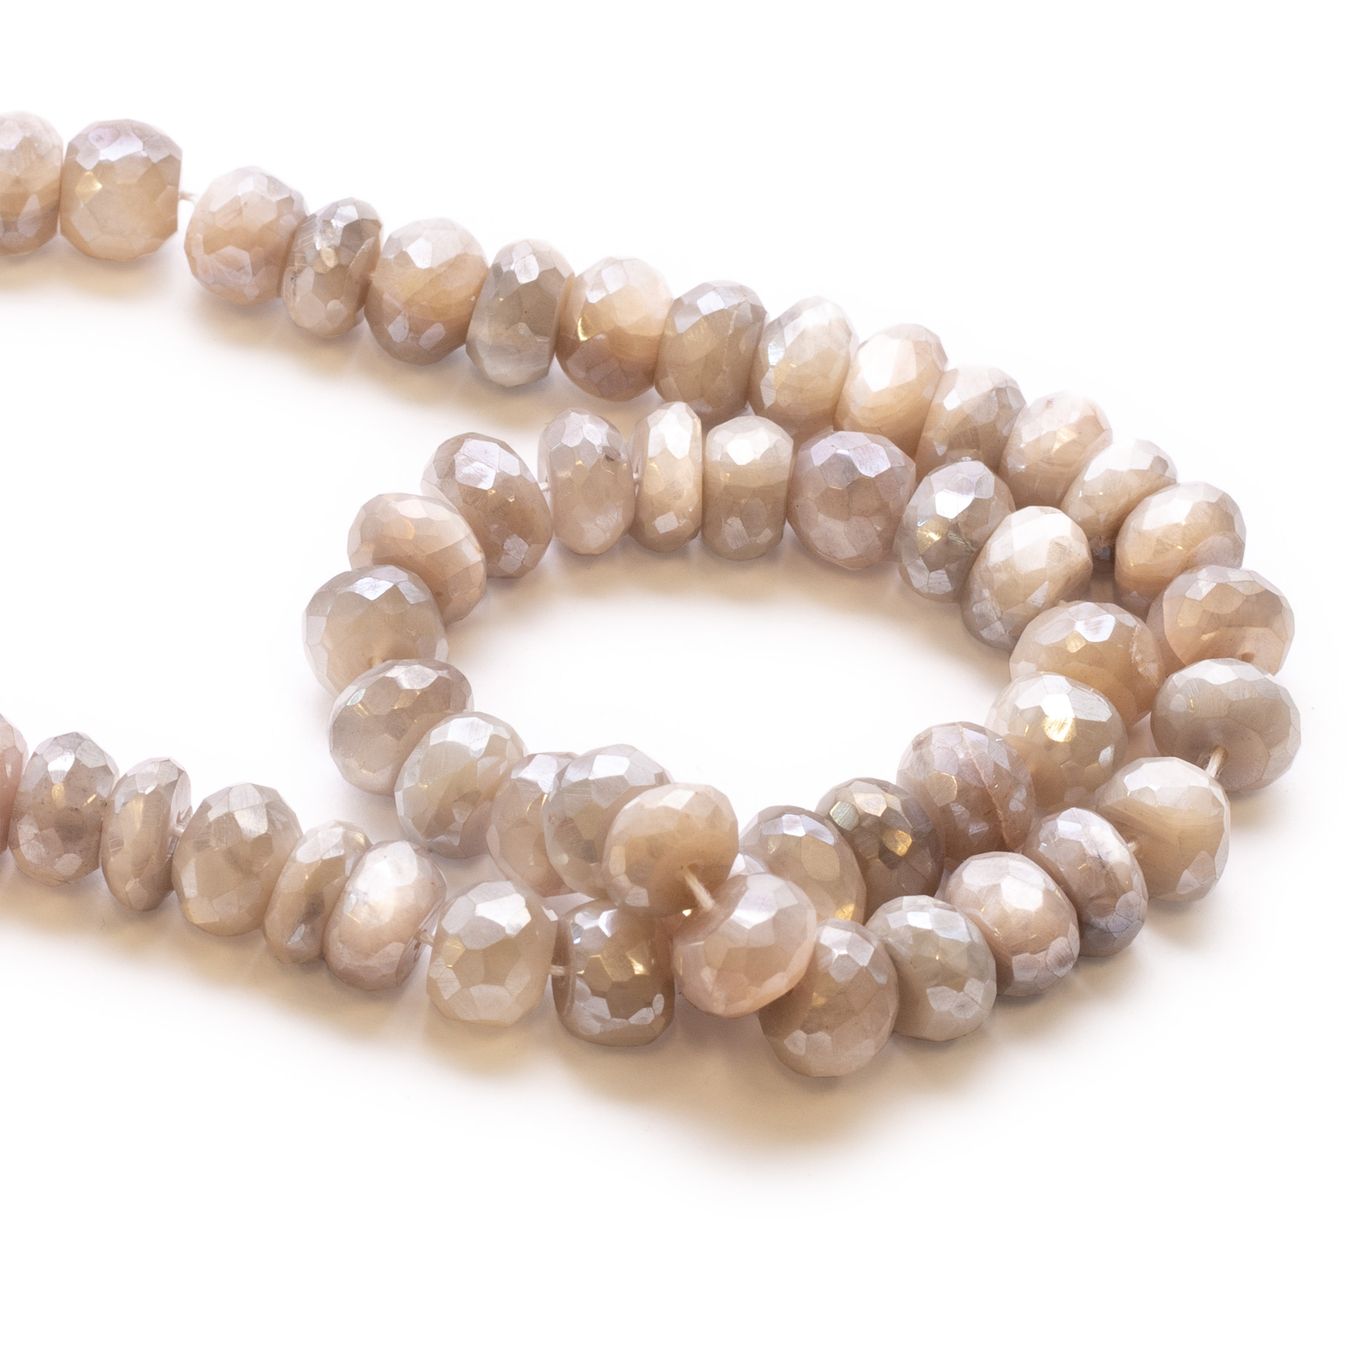 Mystic Coated Silver Moonstone Faceted Rondelle Beads -  Approx From 8mm